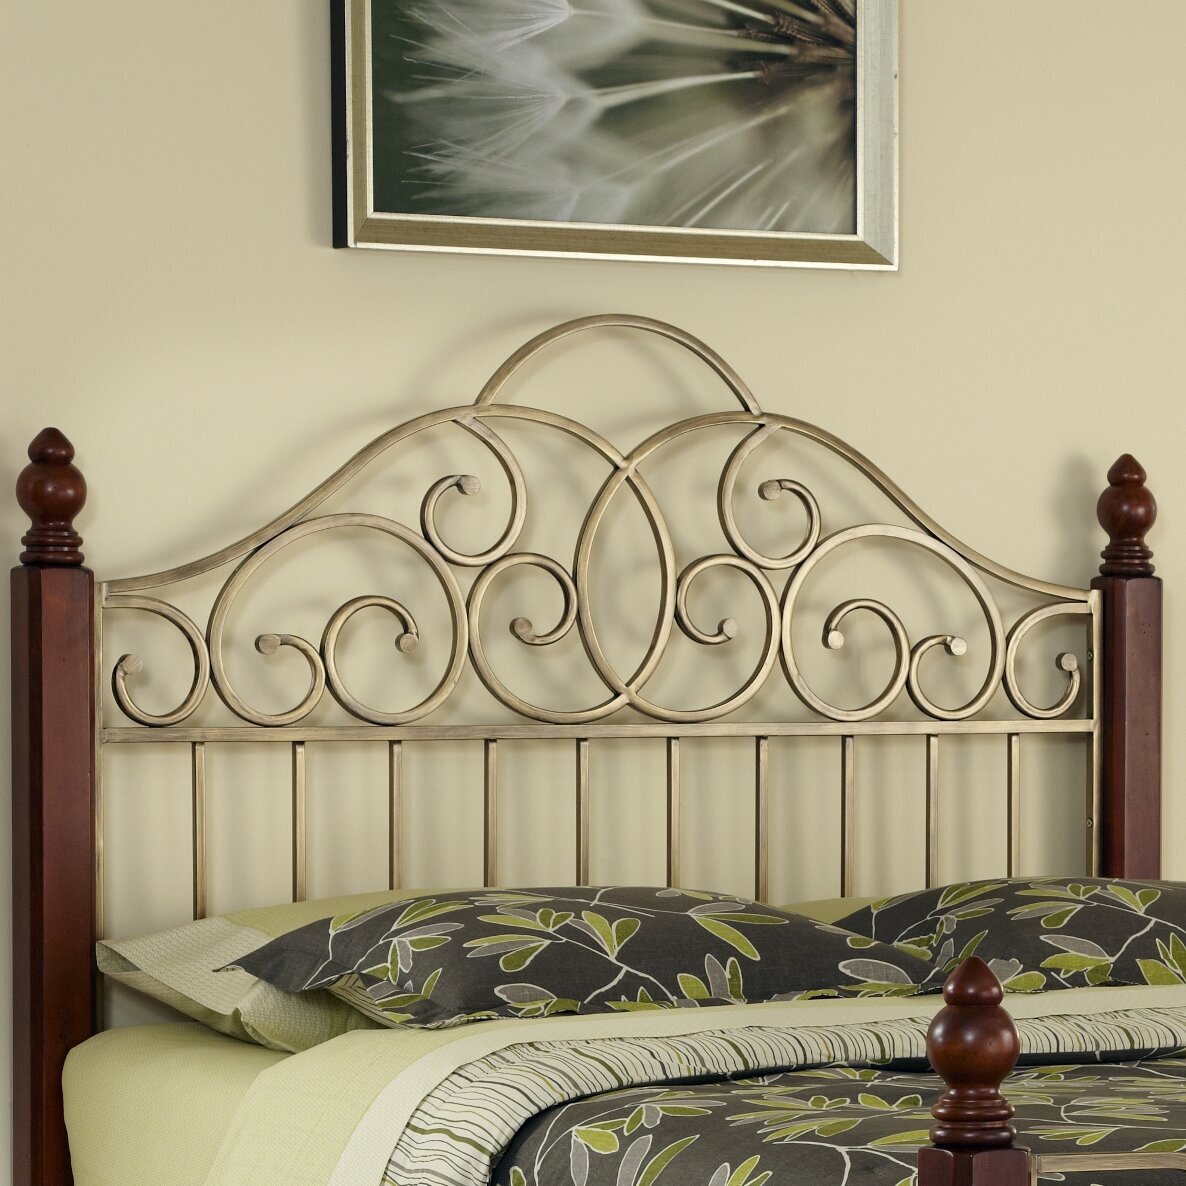 Curvy Open Steel Metal and Wood Headboard With Wood Posts